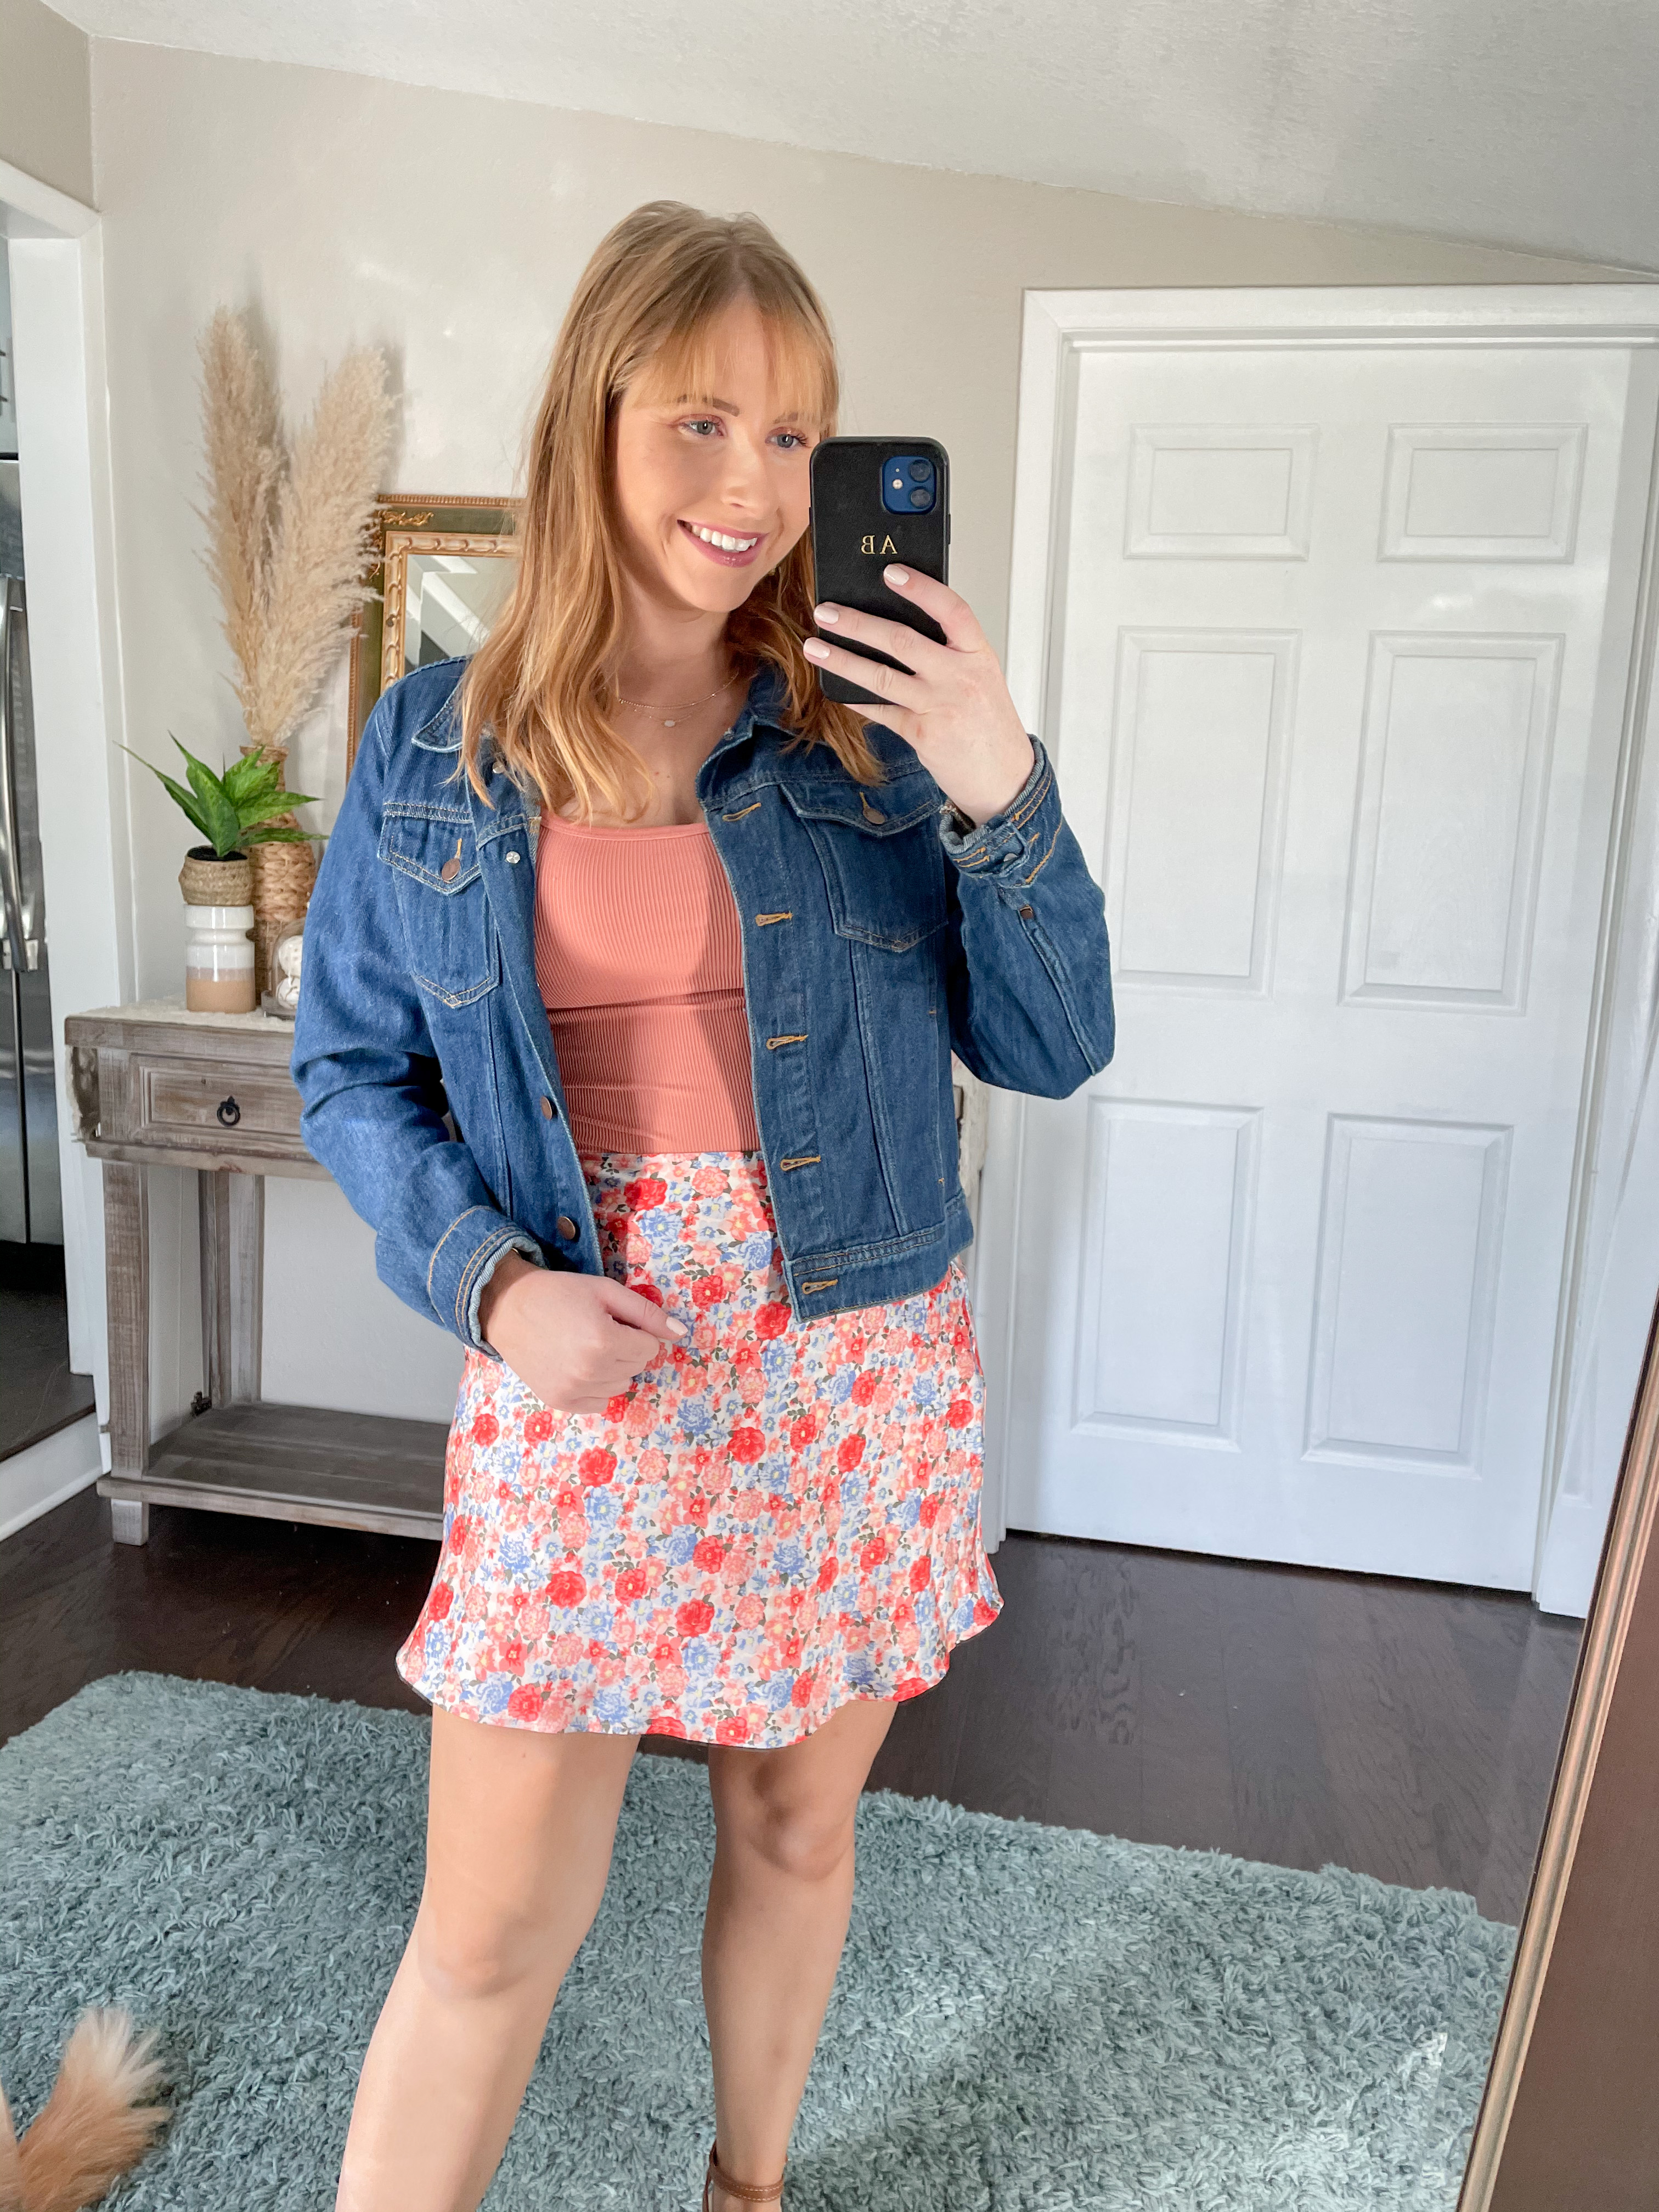 Womens New Arrivals Clothing - Women's Clothing - Walmart.com | Affordable by Amanda wears a coral camisole, floral mini skirt, and denim jacket.